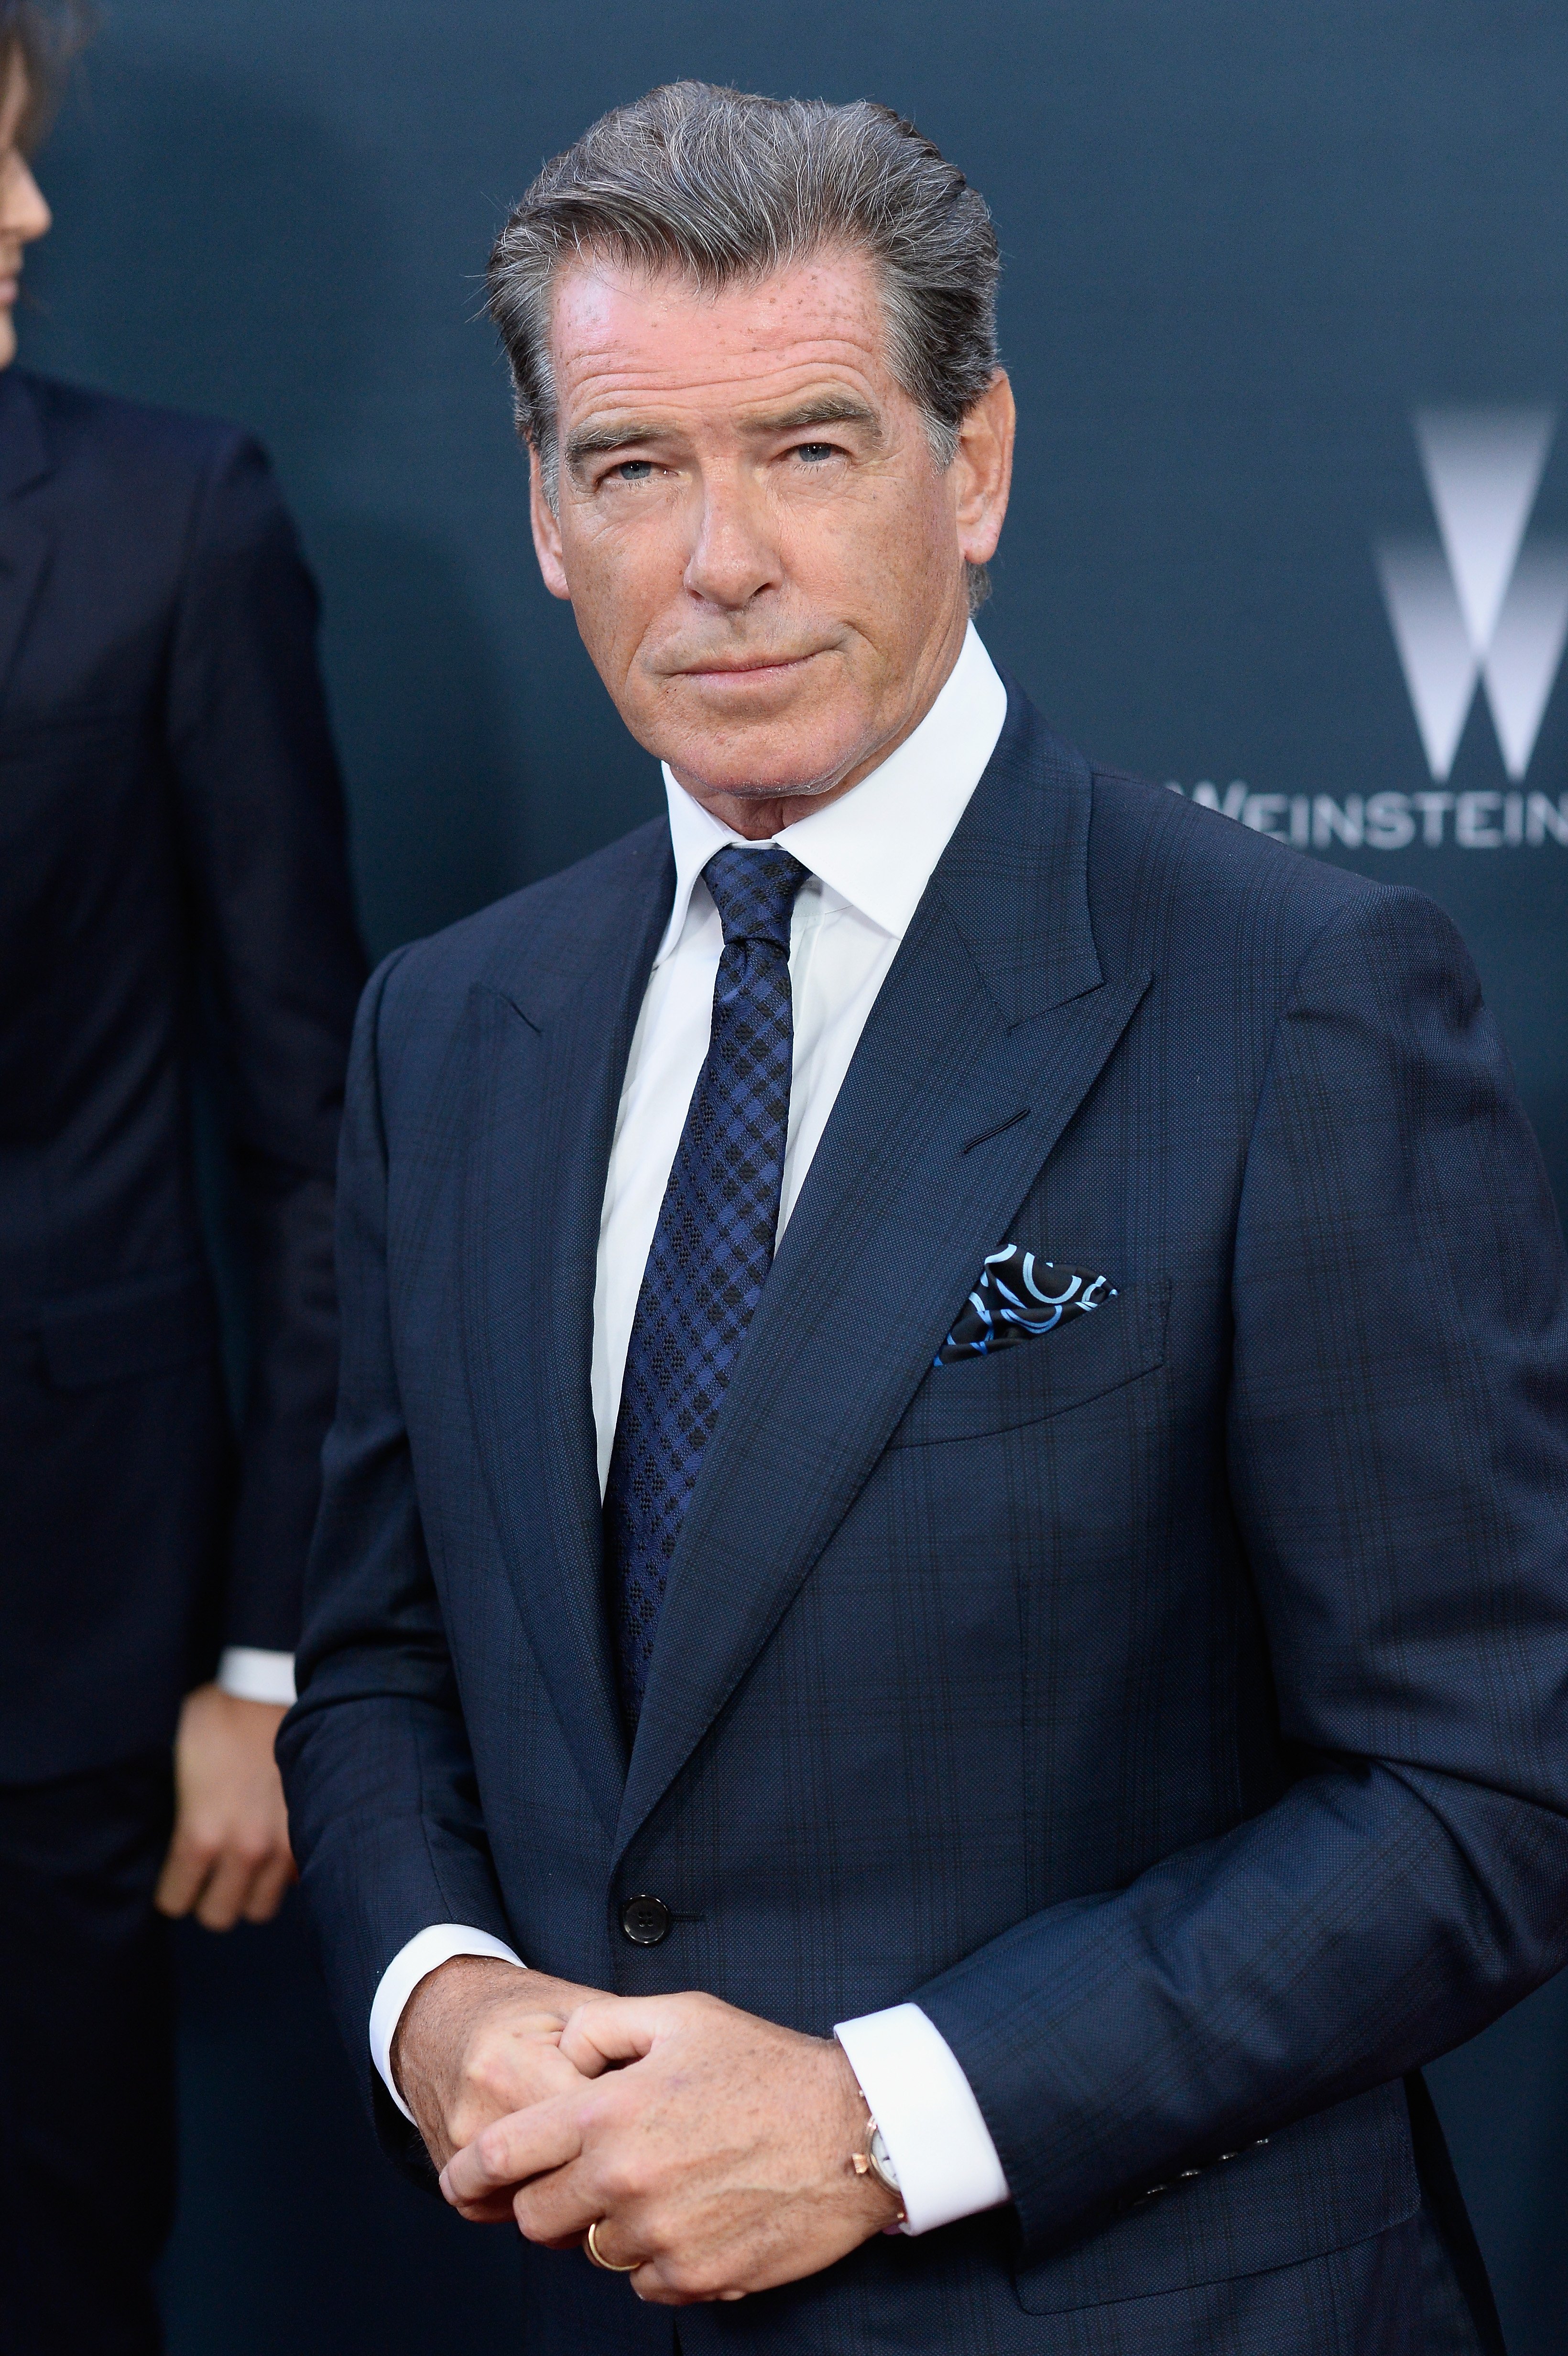 Pierce Brosnan arrives at The Premiere Of The Weinstein Company's "No Escape" at Regal Cinemas L.A. Live on August 17, 2015. | Photo: GettyImages